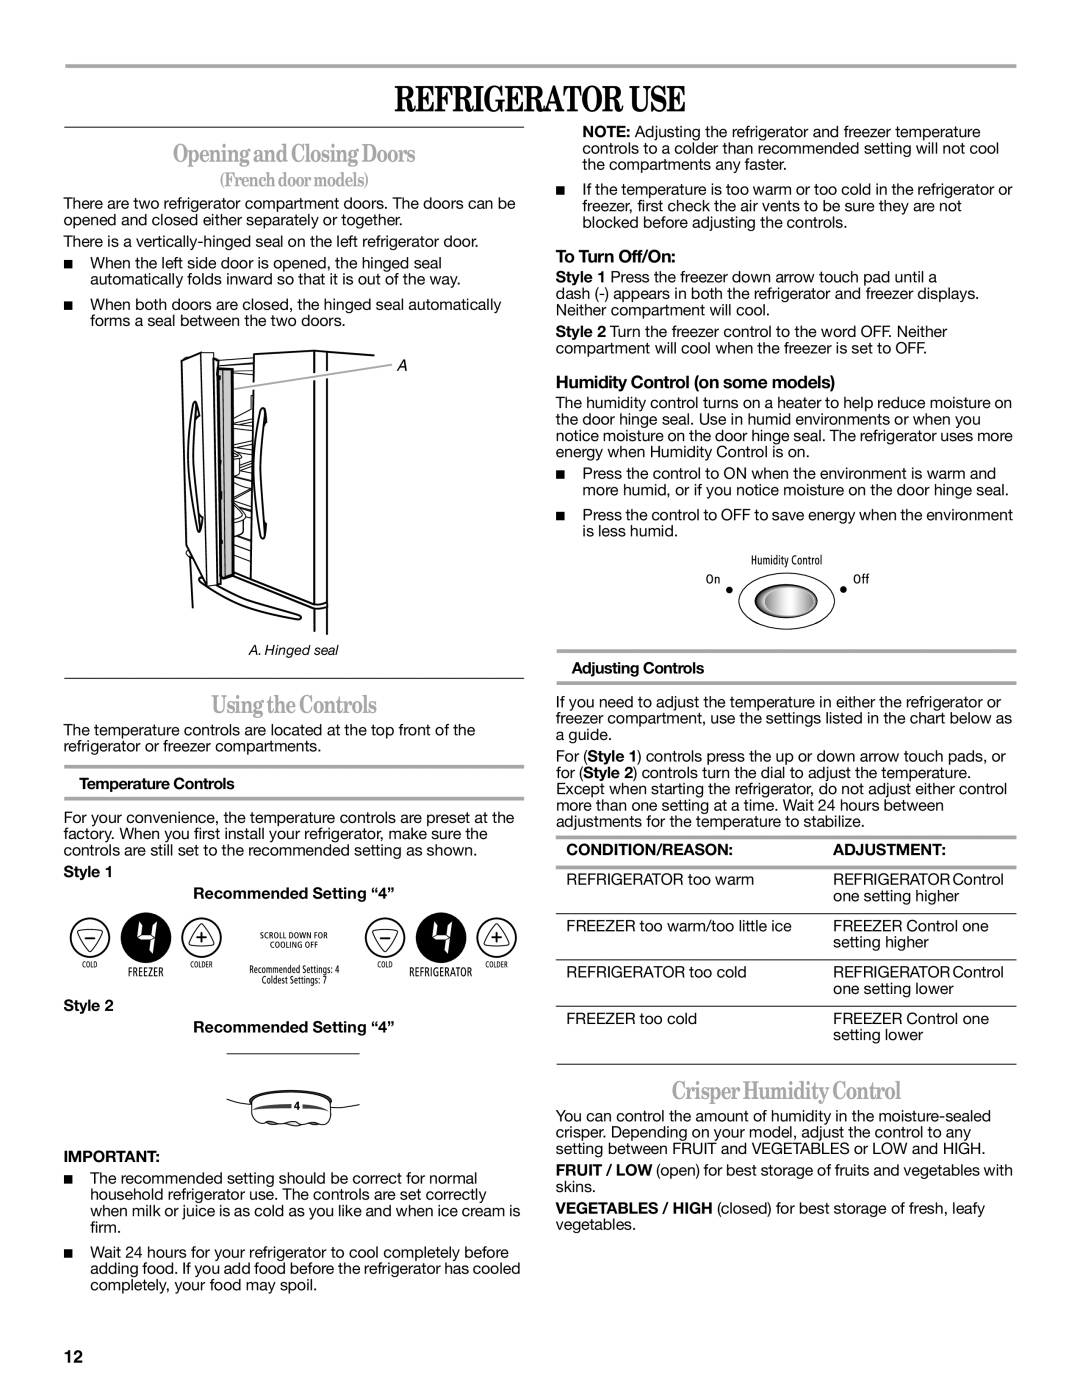 Whirlpool W10208432A Refrigerator Use, Opening and Closing Doors, Using the Controls, Crisper Humidity Control, Adjustment 